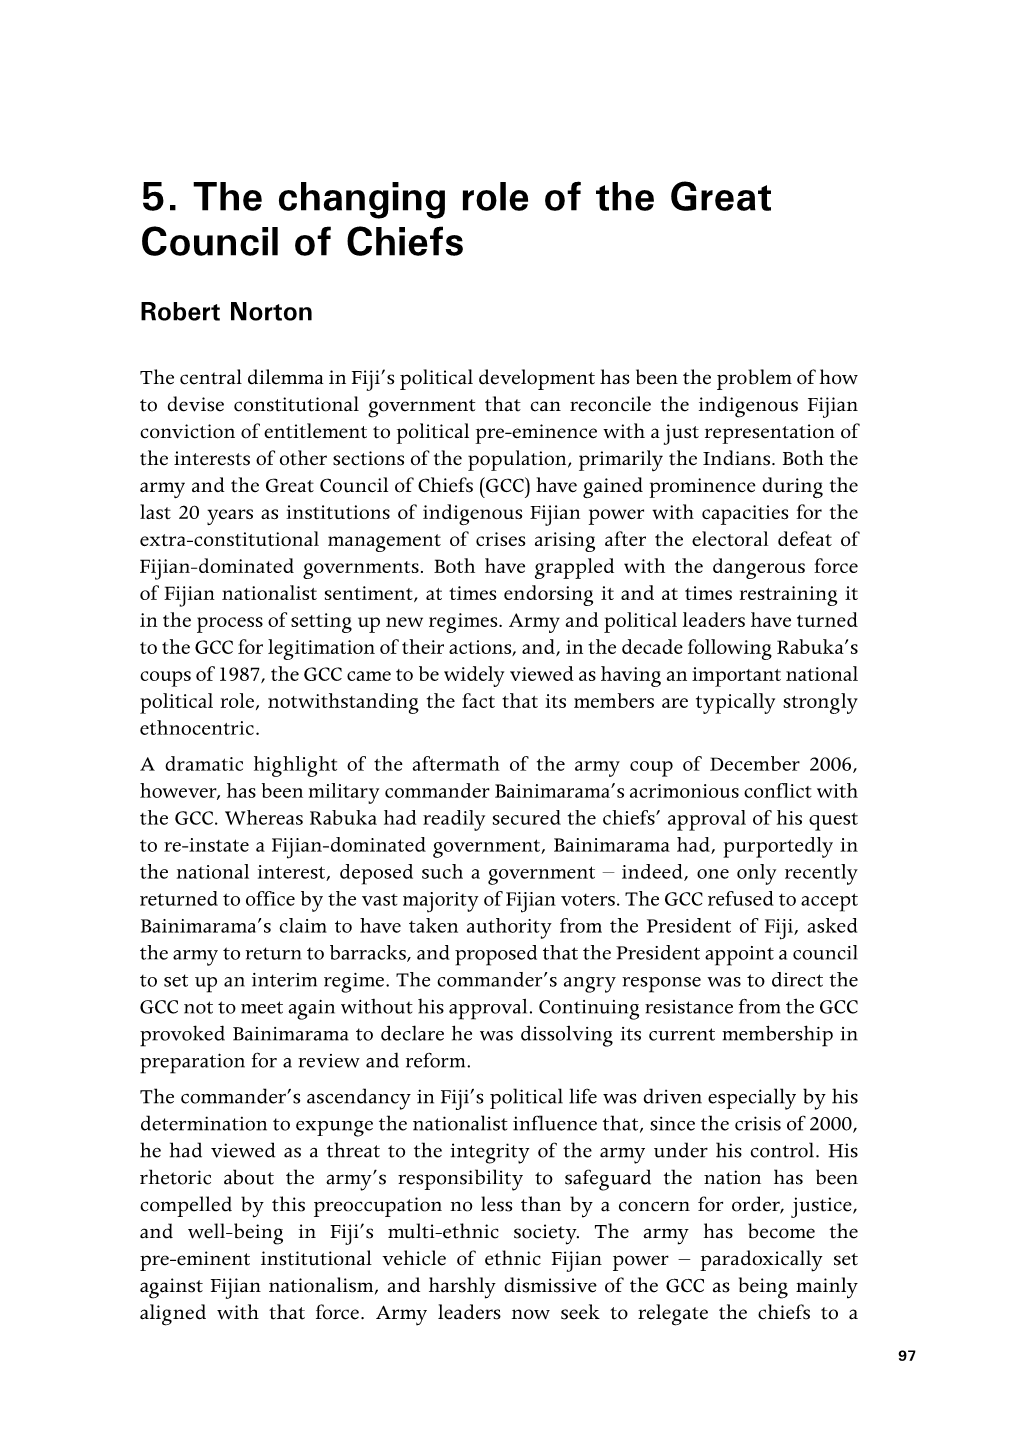 The Changing Role of the Great Council of Chiefs